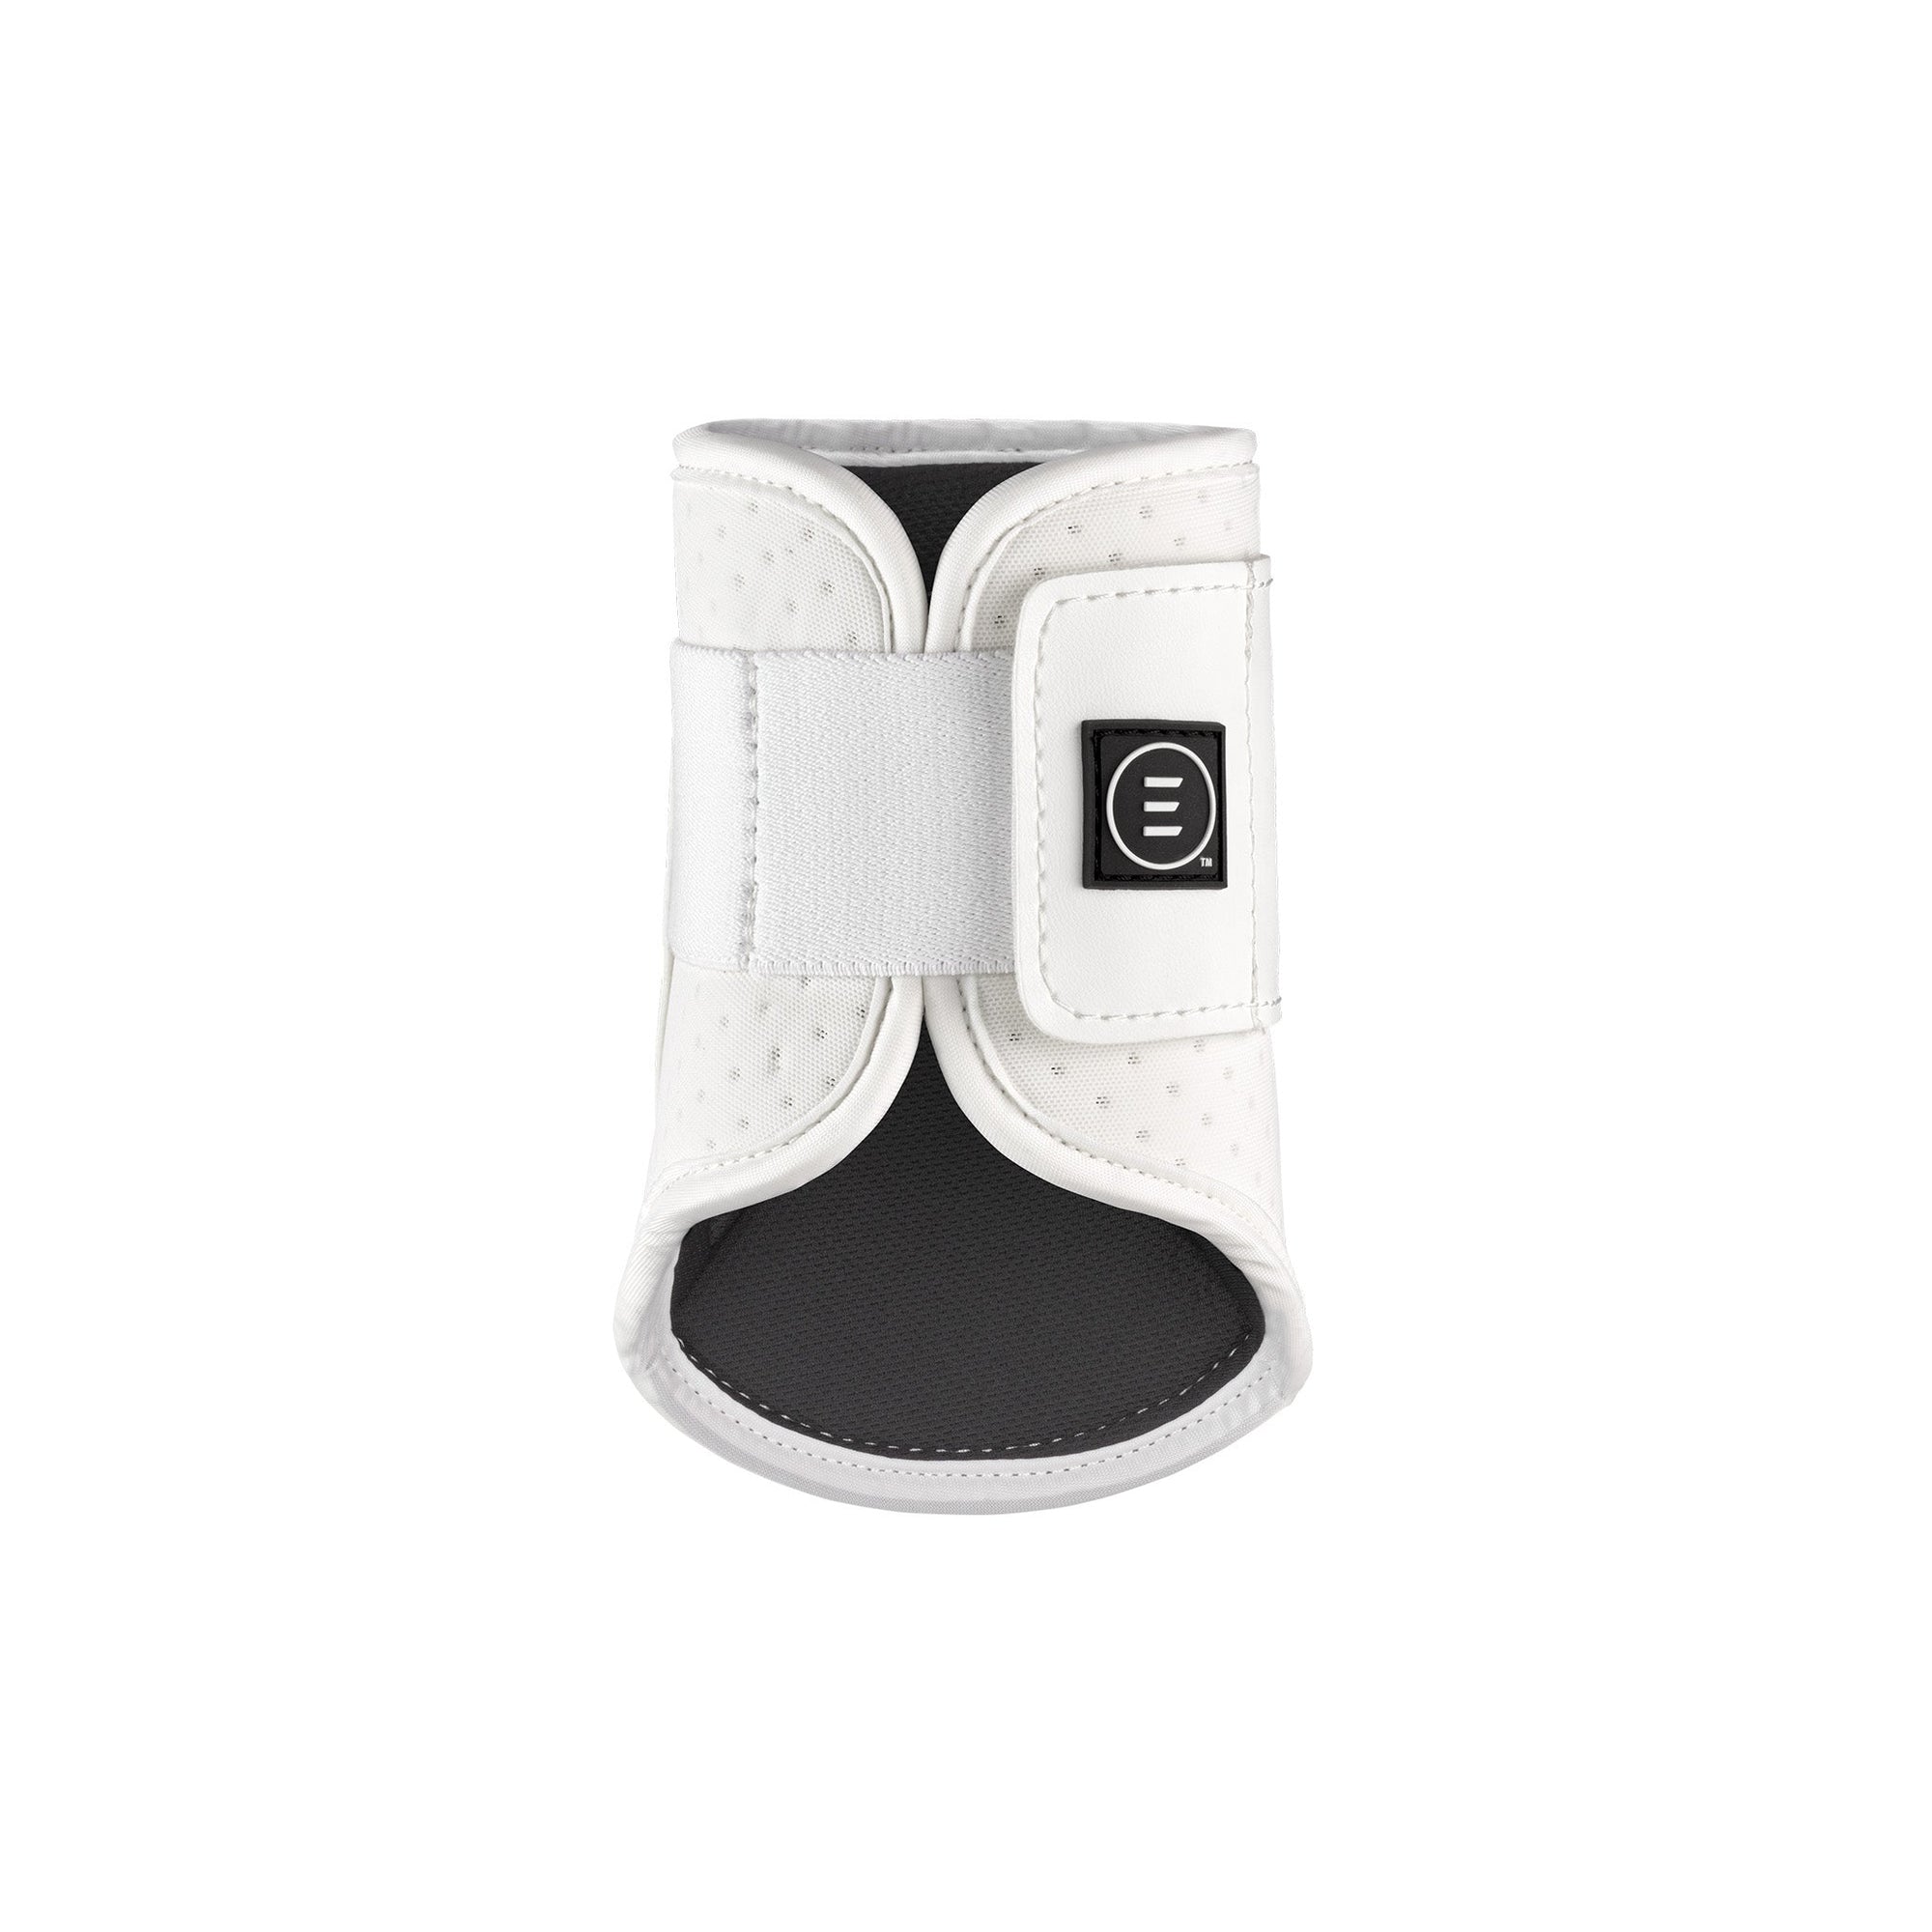 The Essential EveryDay Hind Boot in White